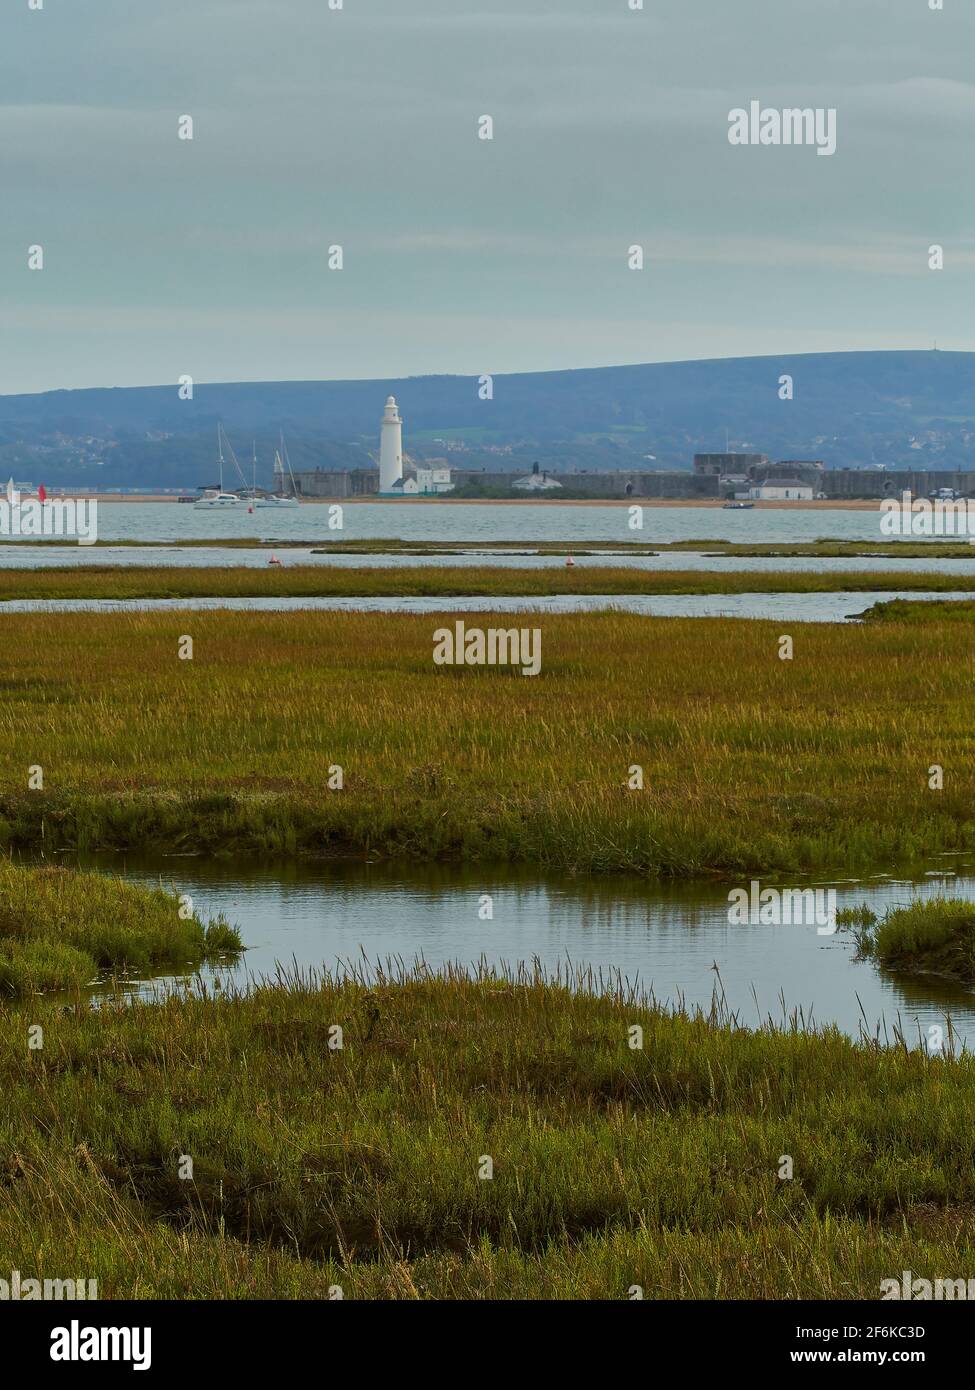 A creek runs through lush, long grass. In the background, the Solent appears before a lighthouse, a small flotilla of yachts and olling hills. Stock Photo